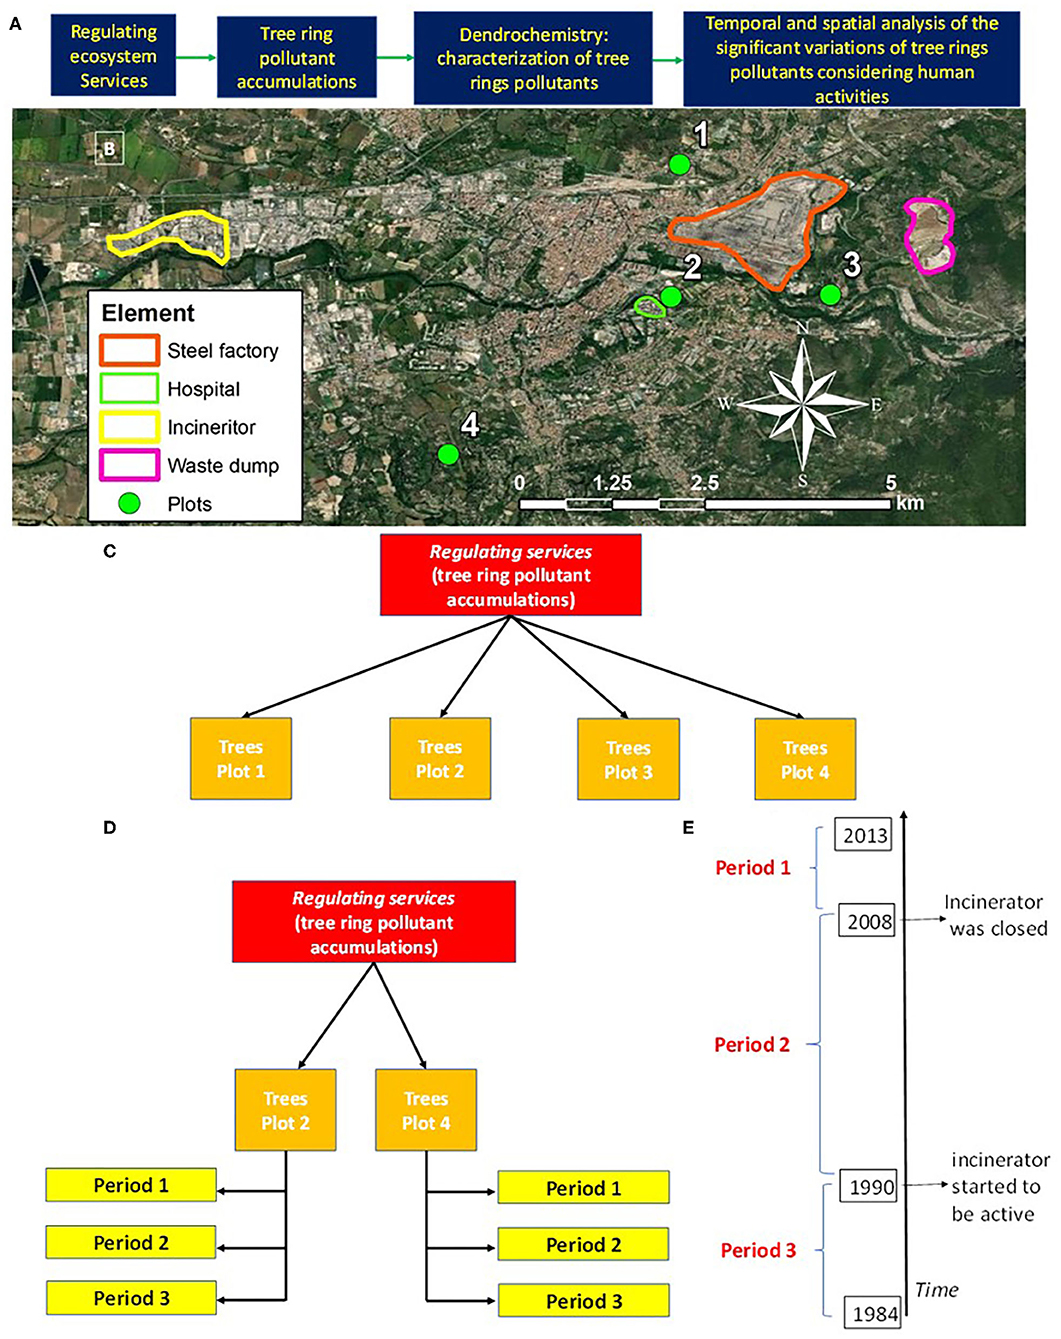 Frontiers Dendrochemistry Ecosystem Services Perspectives For Urban Biomonitoring Environmental Science